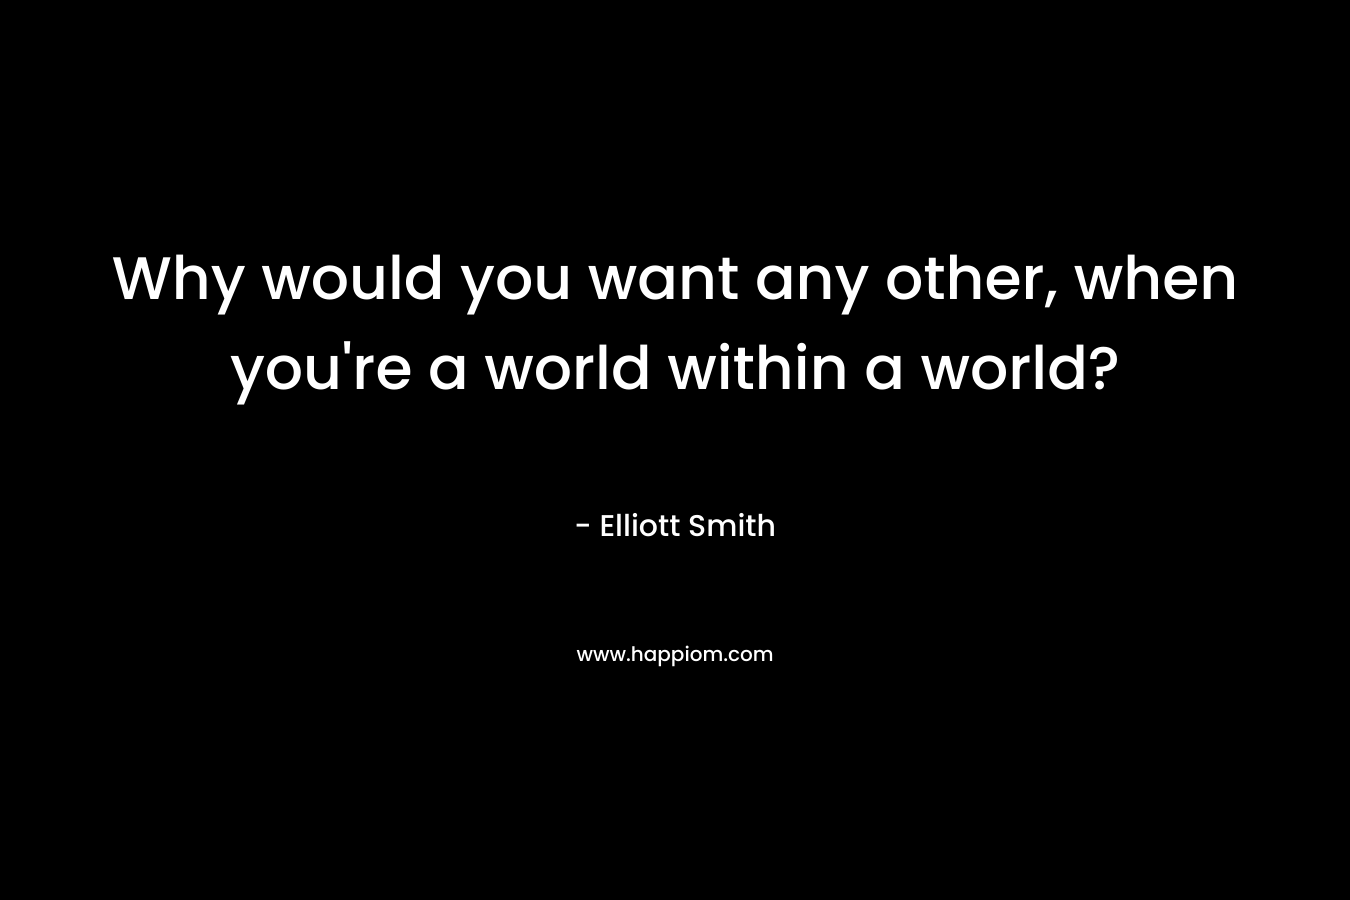 Why would you want any other, when you're a world within a world?